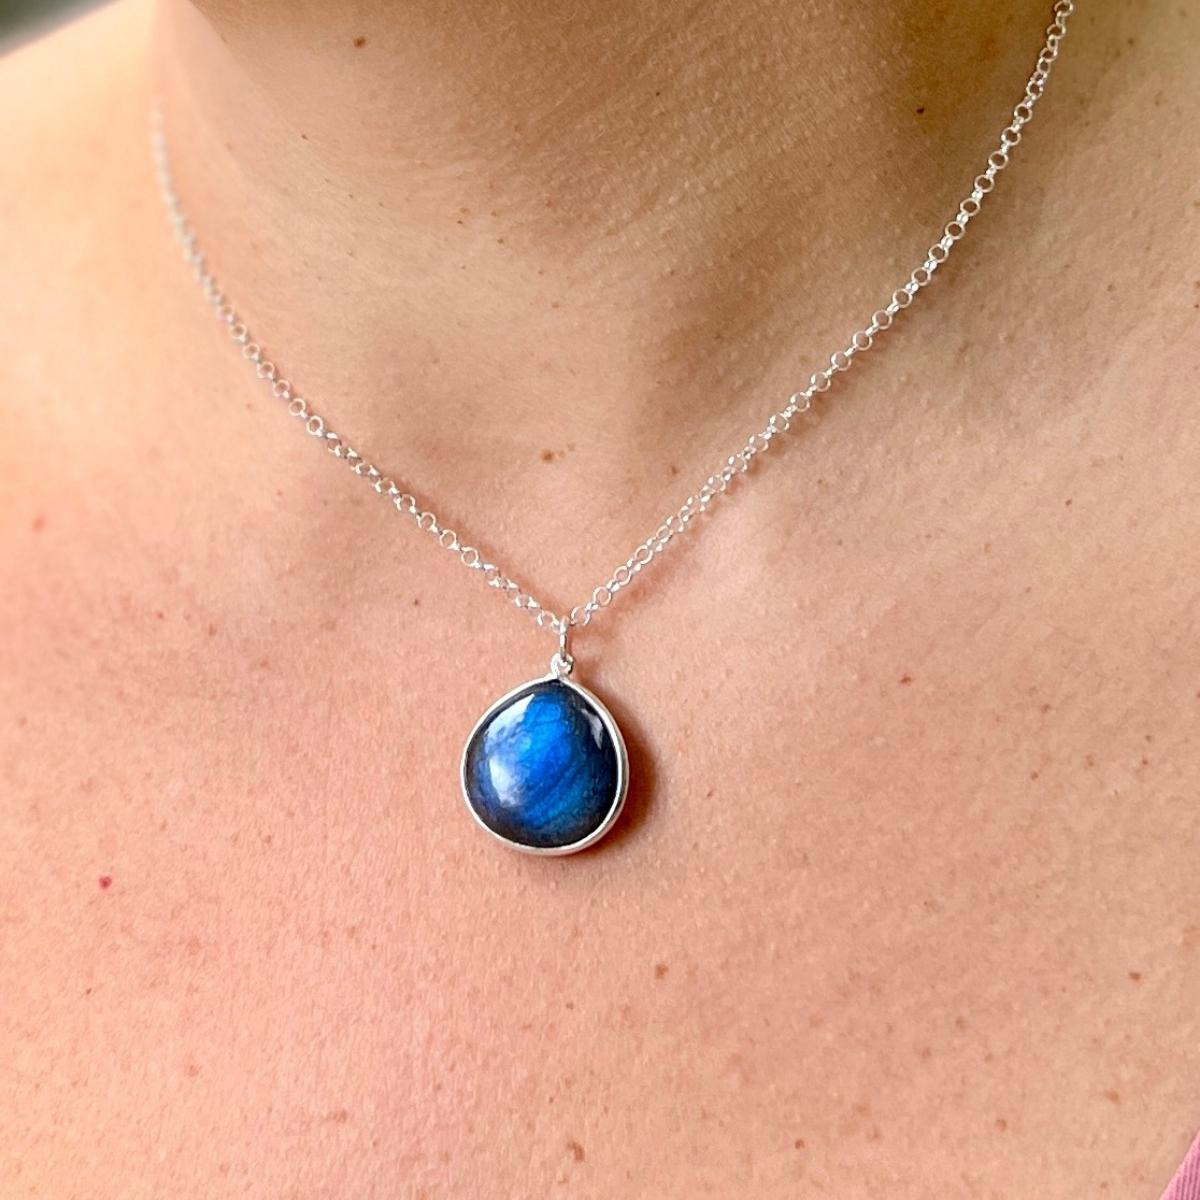 The Magic Mindset Labradorite Necklace is a beautiful sterling silver necklace that features a stunning, 1 inch teardrop-shaped labradorite stone as its centerpiece. Labradorite is a unique crystal known for its iridescent hues and ability to enhance positivity, intuition and spiritual awareness.